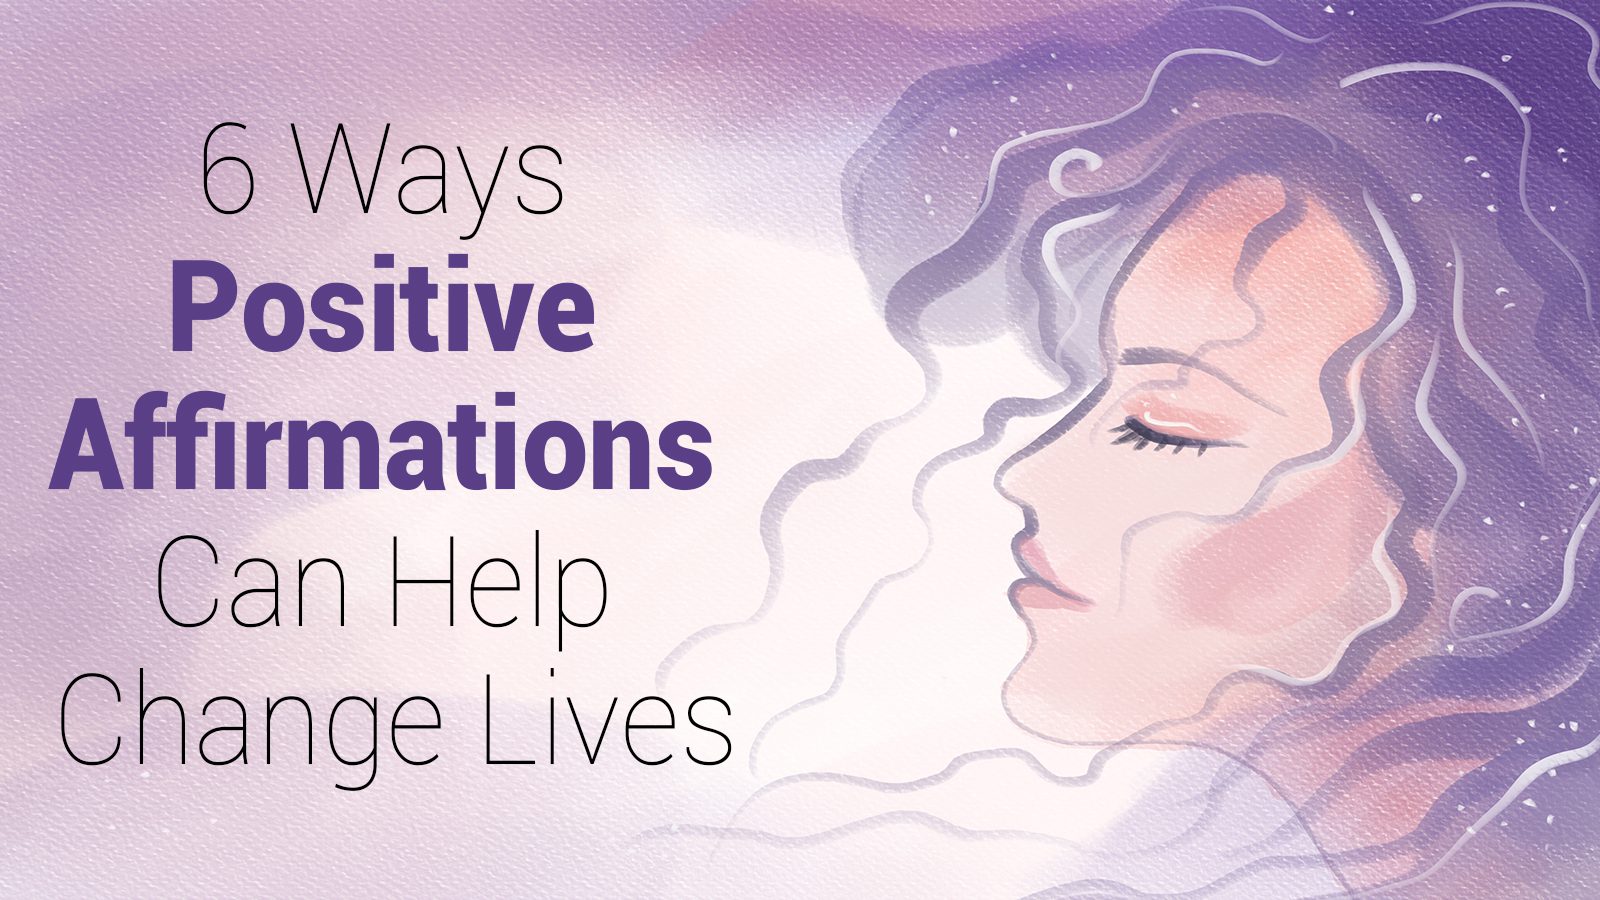 6 Ways Positive Affirmations Can Help Change Lives